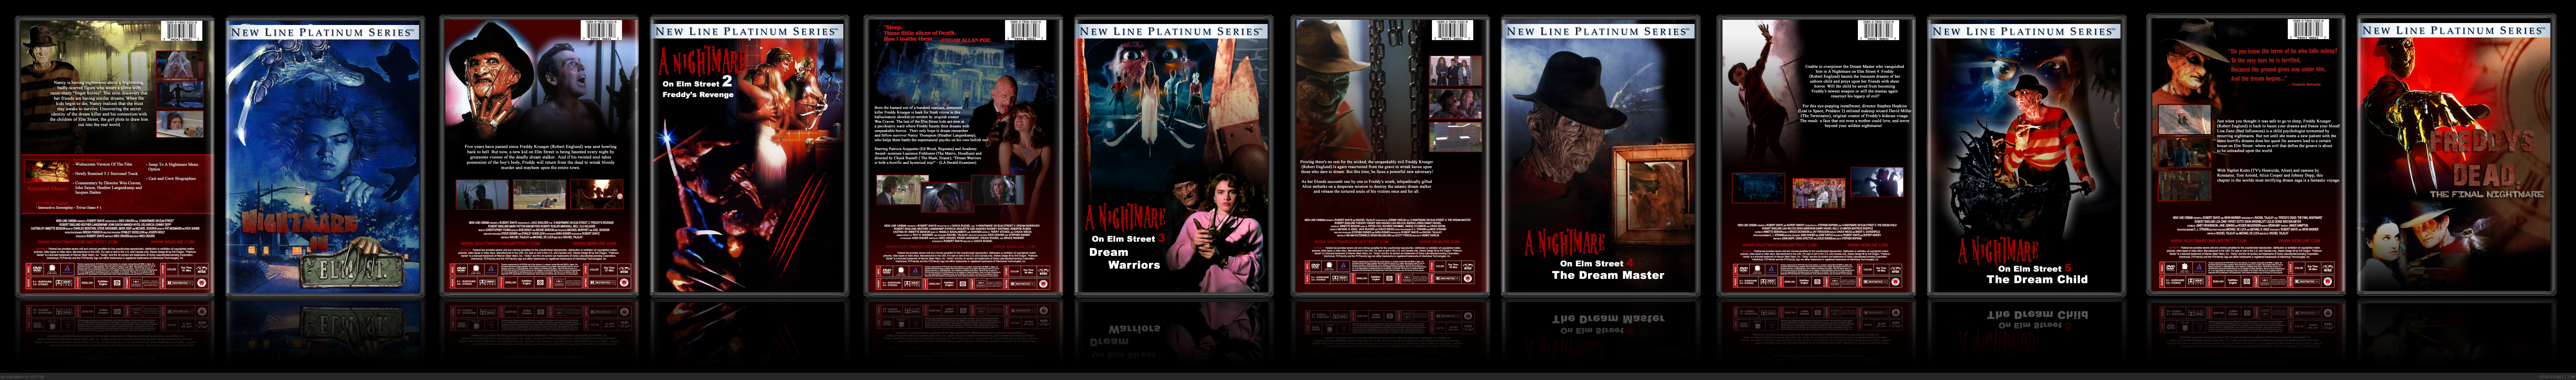 A Nightmare On Elm Street: The Collection box cover